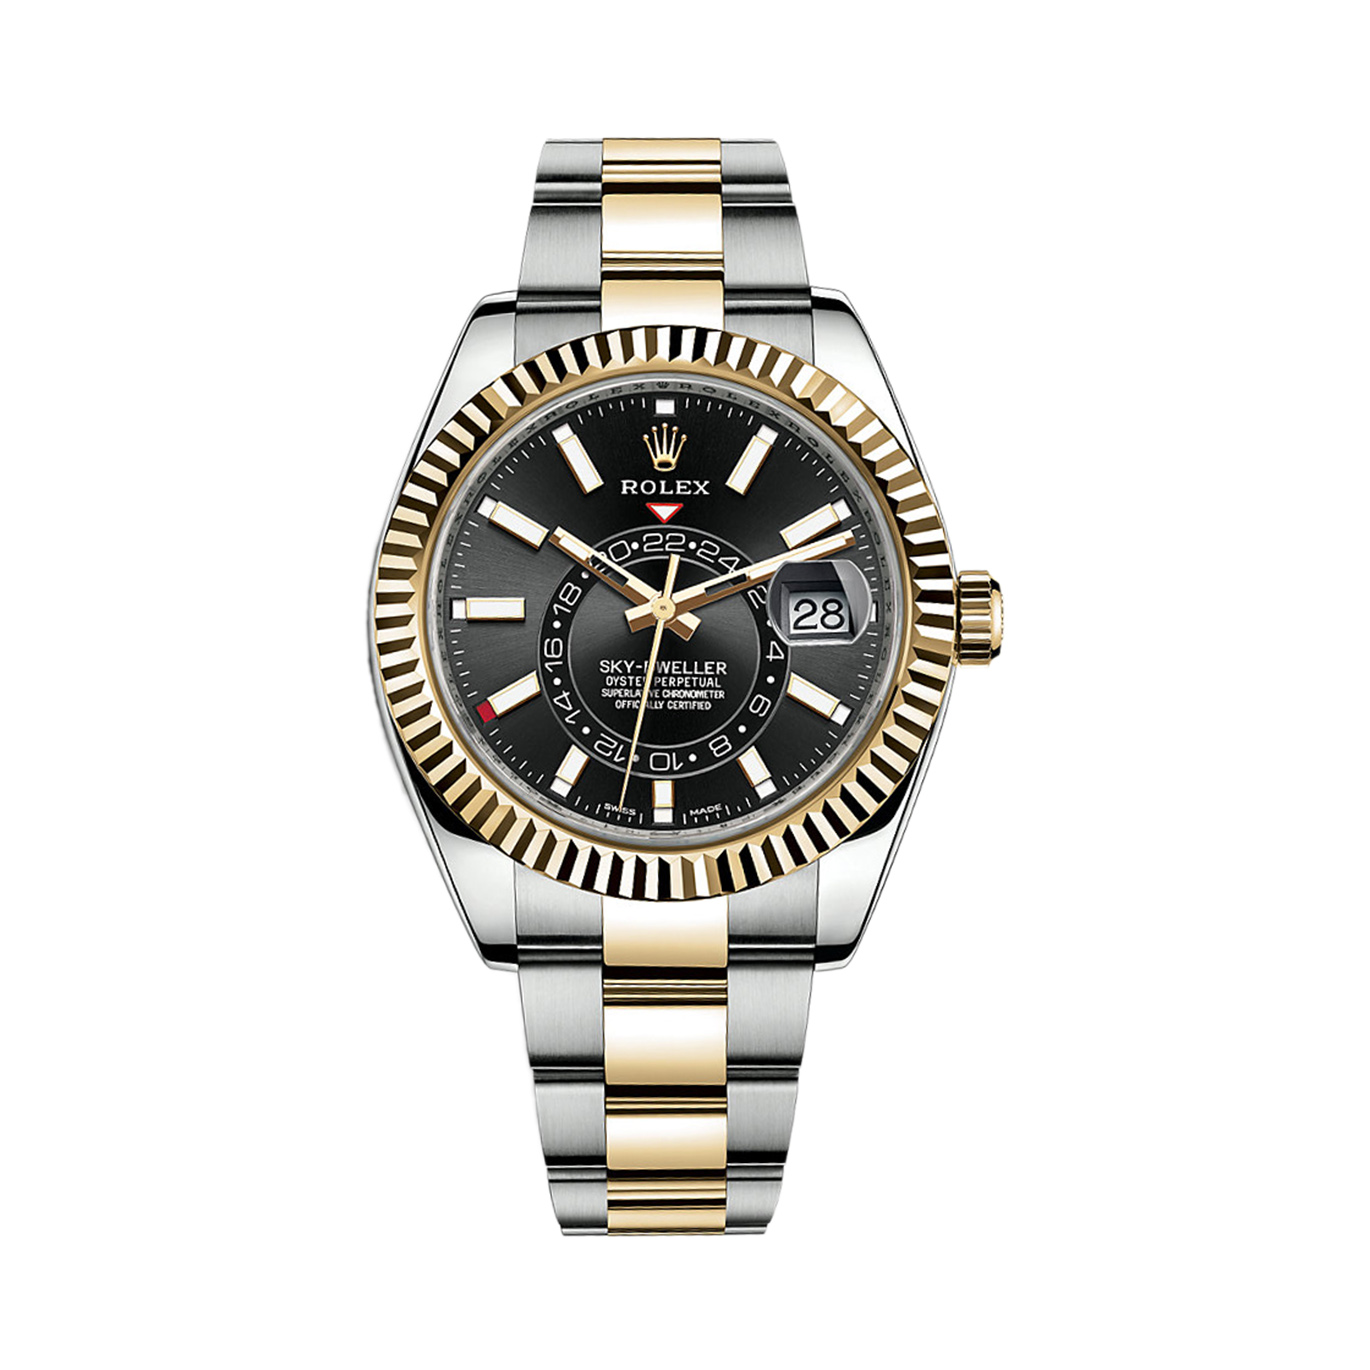 Sky-Dweller 326933 Yellow Gold & Stainless Steel Watch (Black)